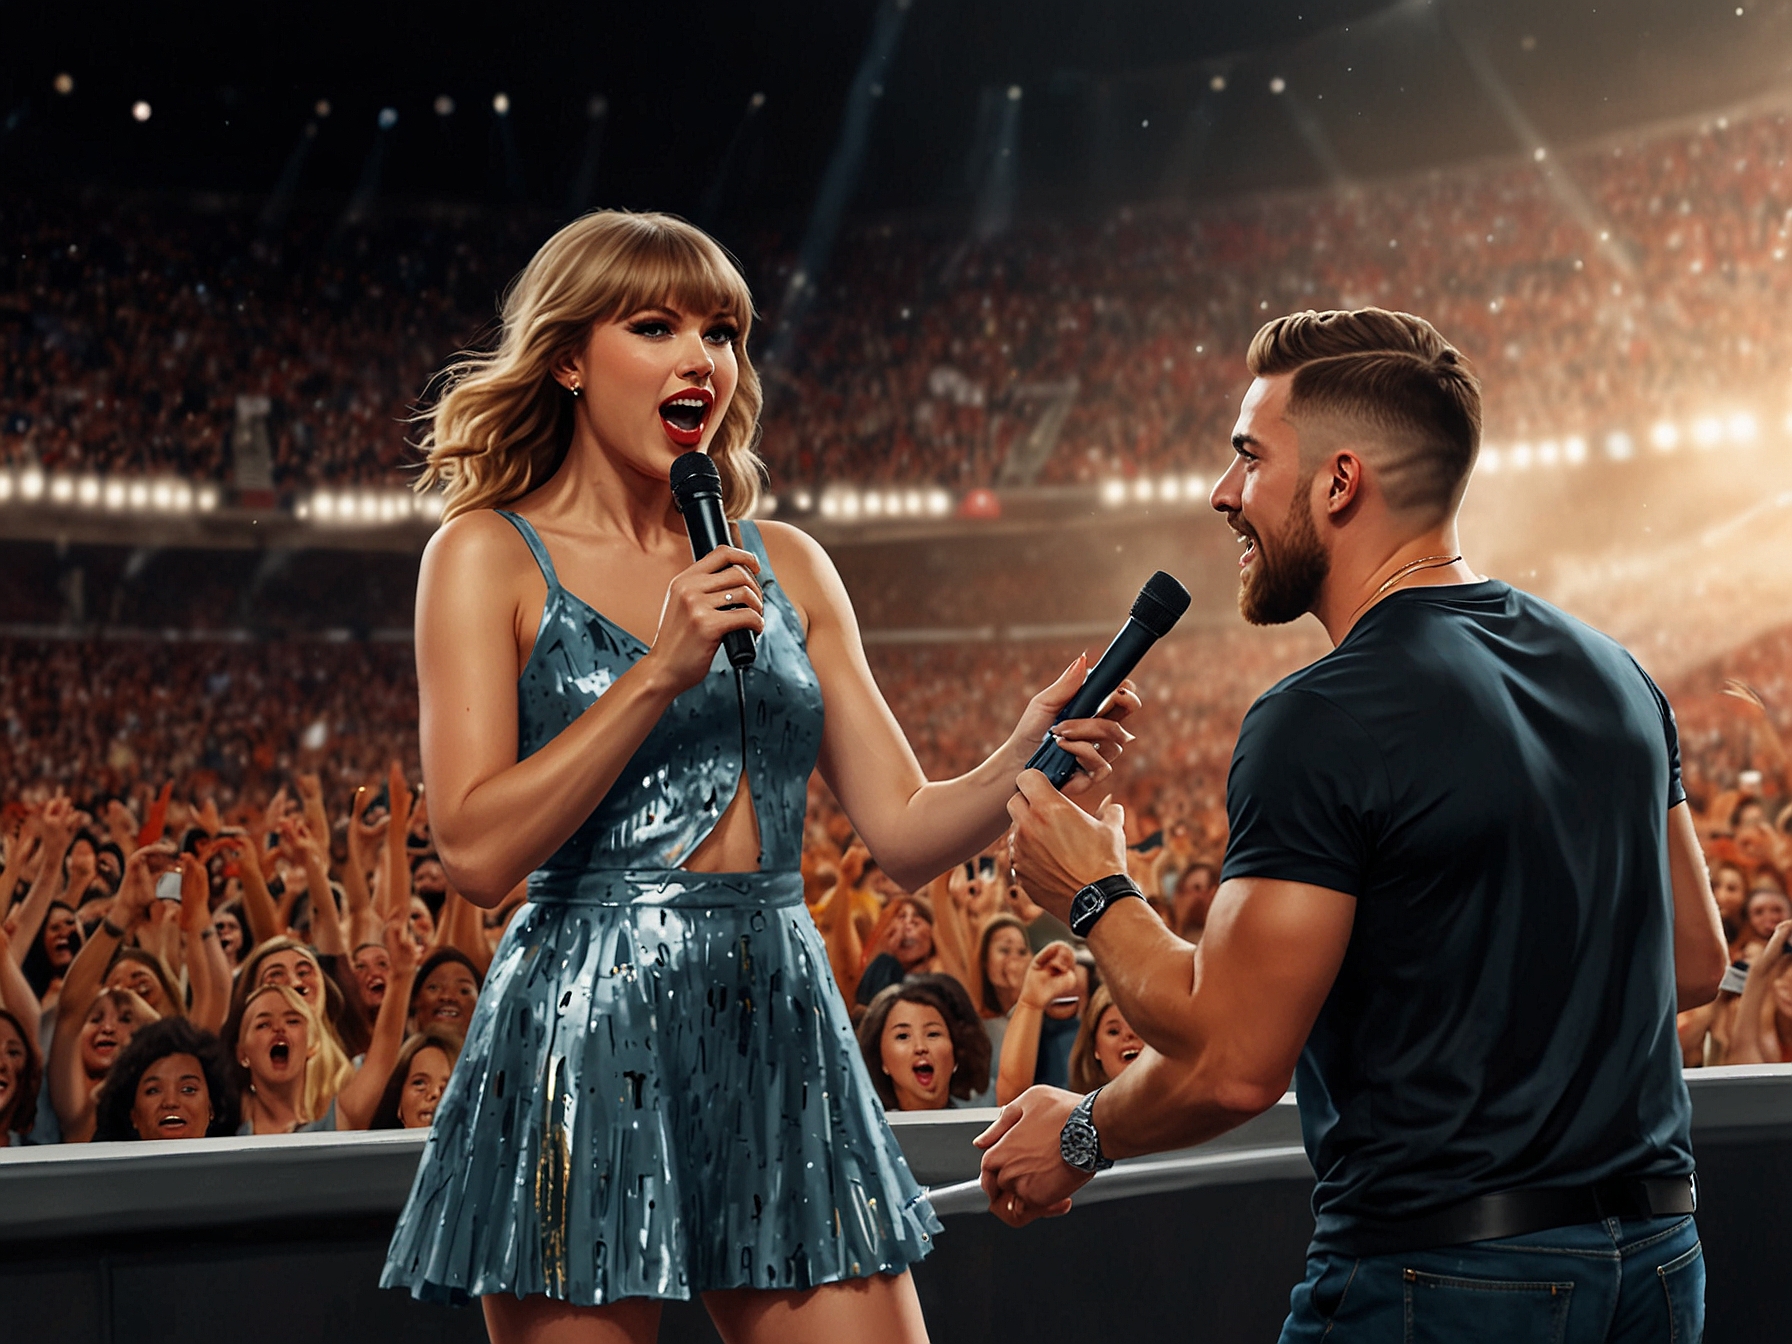 Taylor Swift performing at Wembley Stadium, with Travis Kelce making a surprise onstage appearance. The stadium crowd is electrified, capturing the magical moment with their phones.